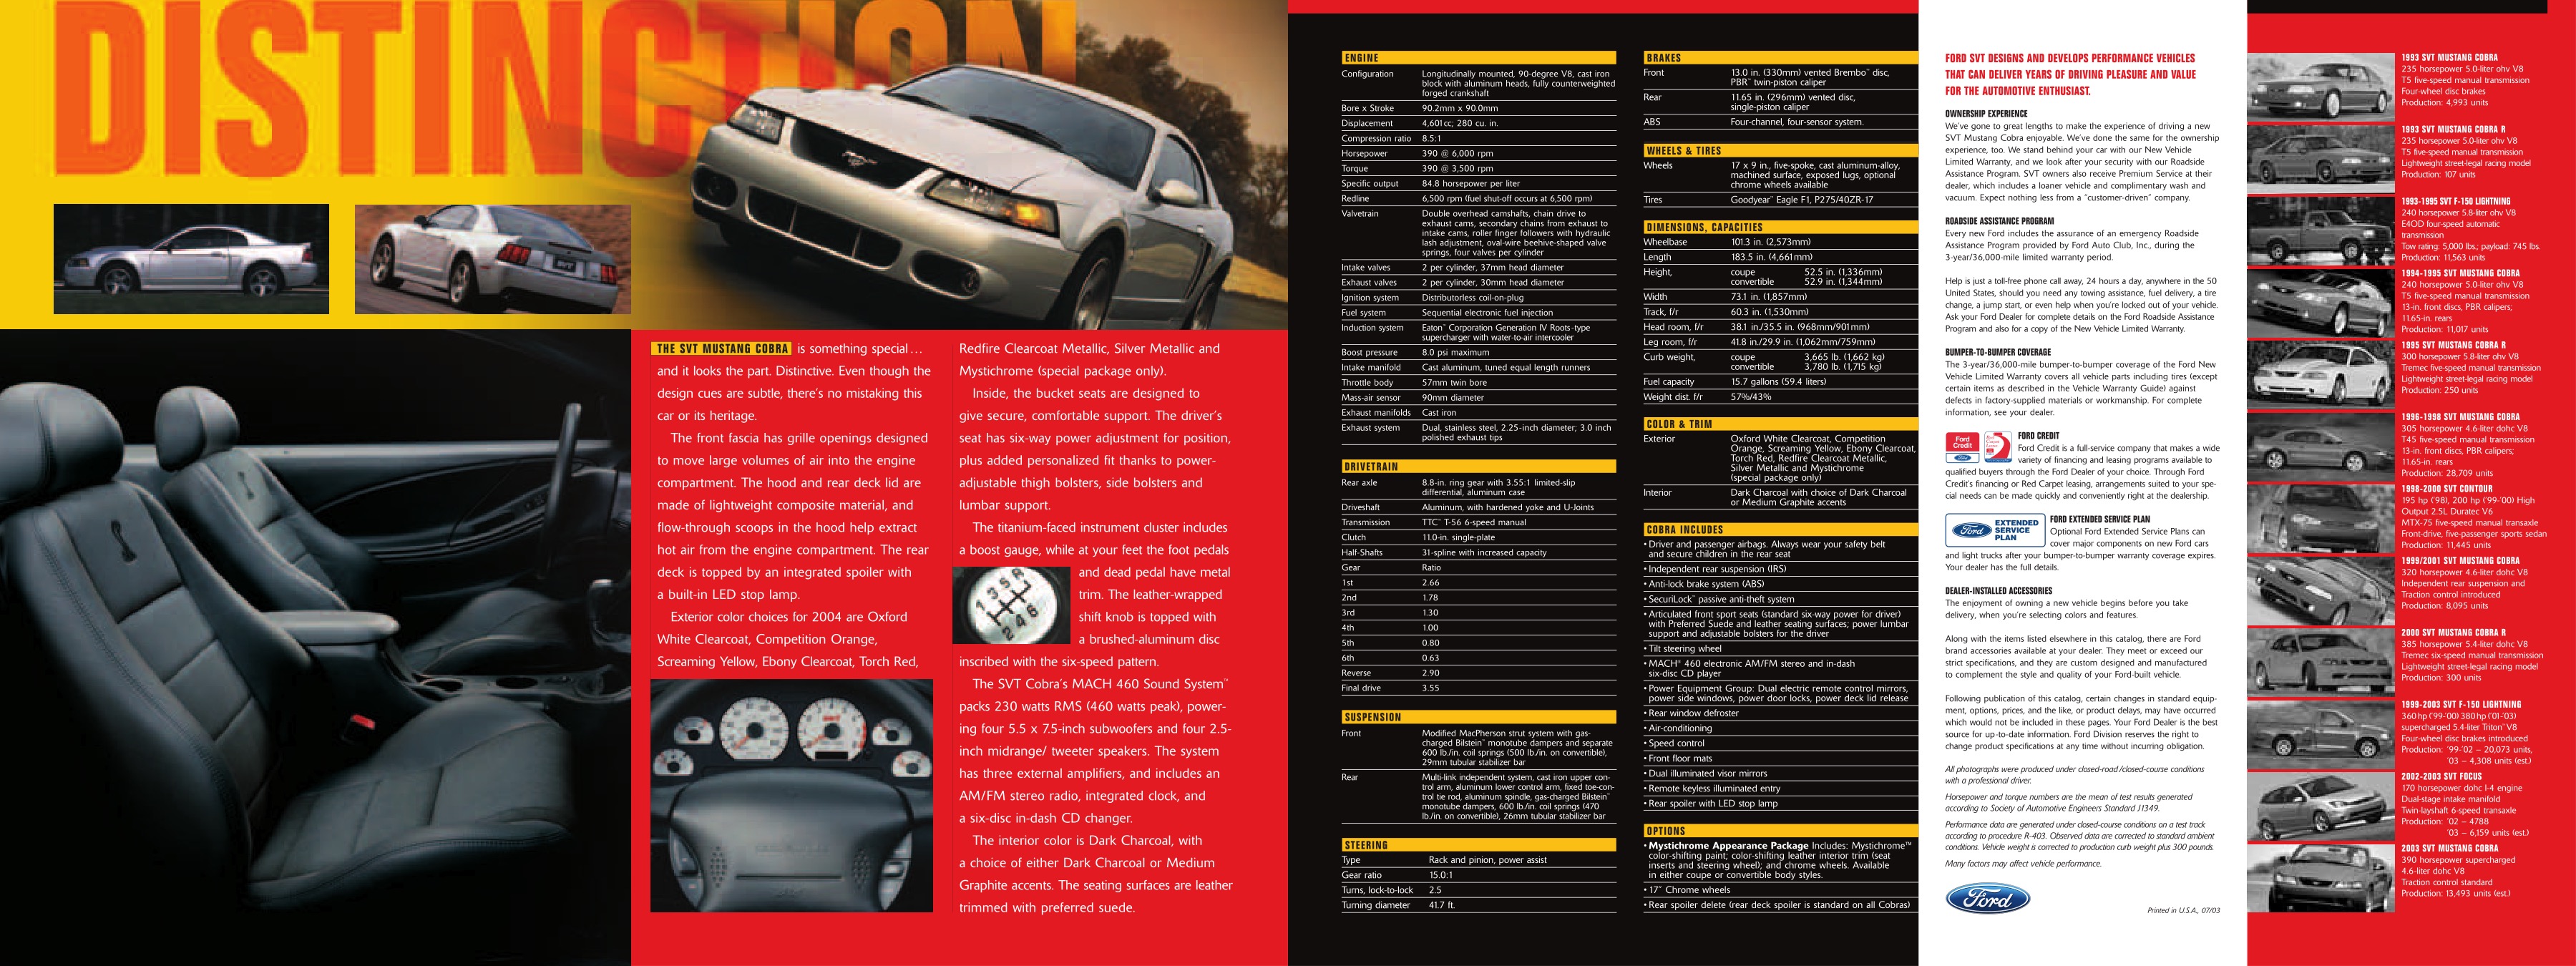 2004 Ford Mustang Cobra Brochure Page 6